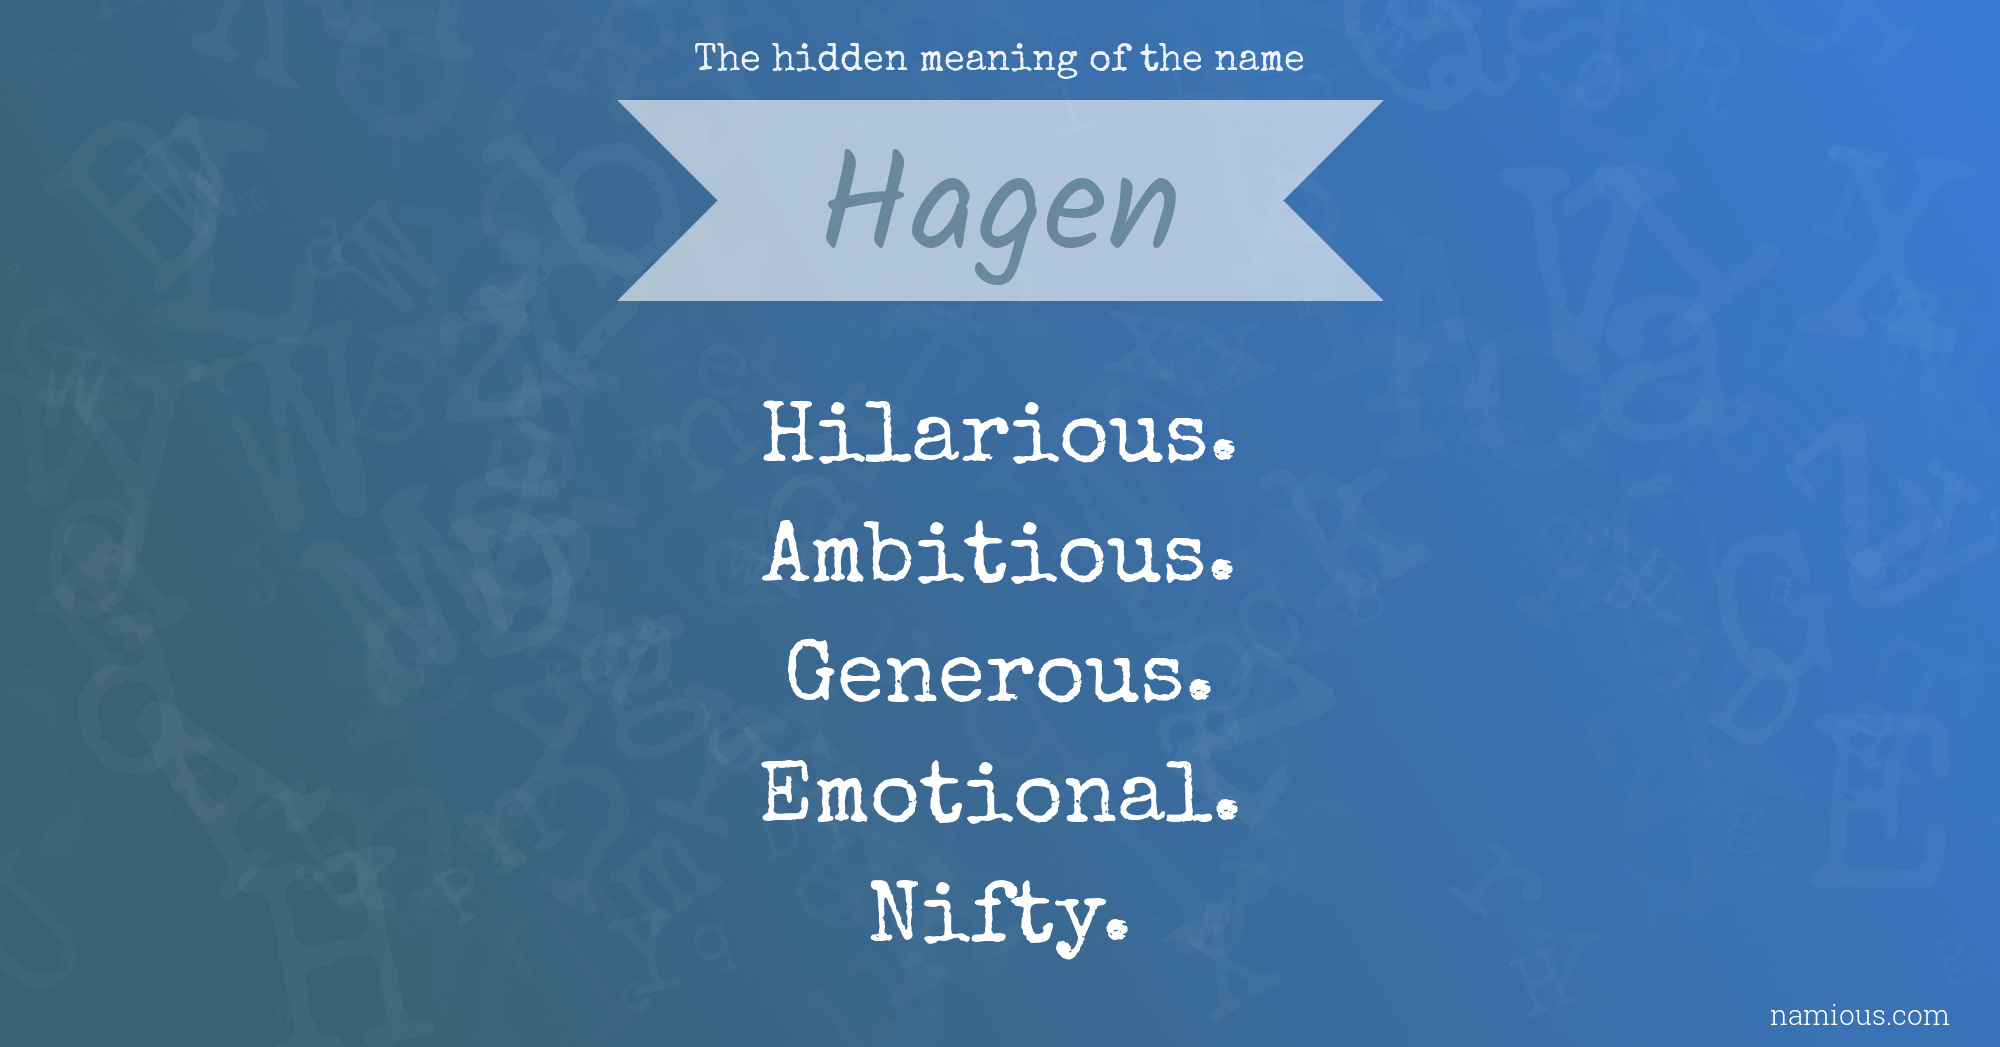 The hidden meaning of the name Hagen